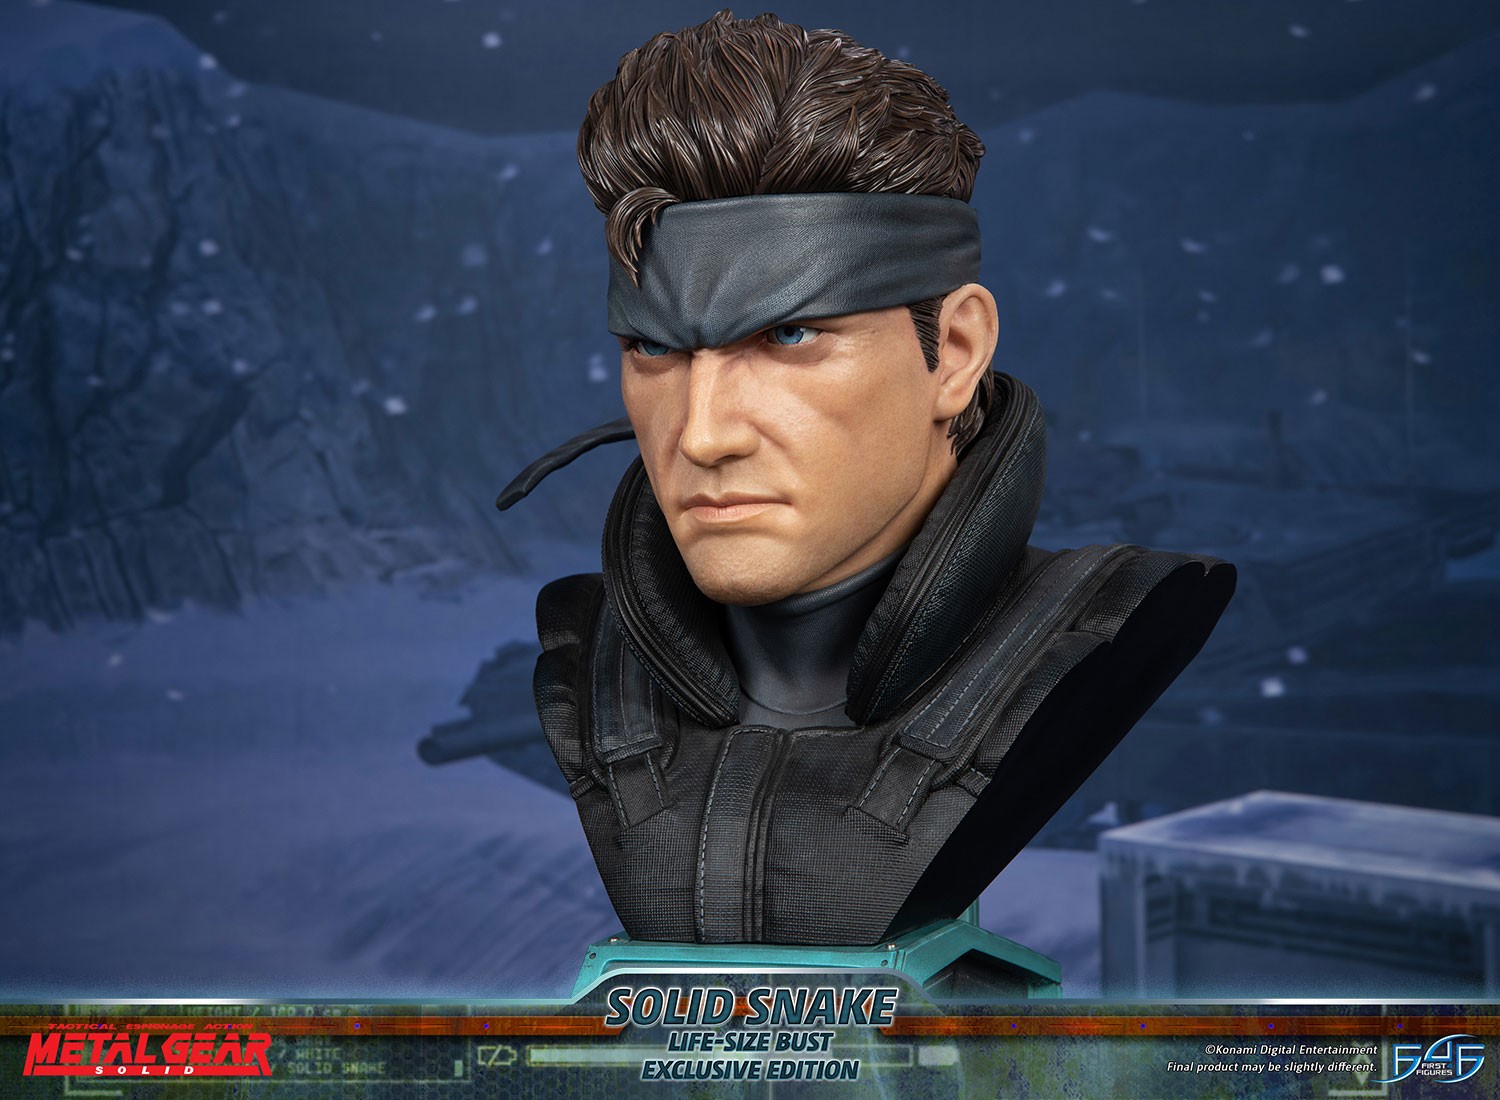 Solid Snake Life-Size bust statue in the making by First 4 Figures